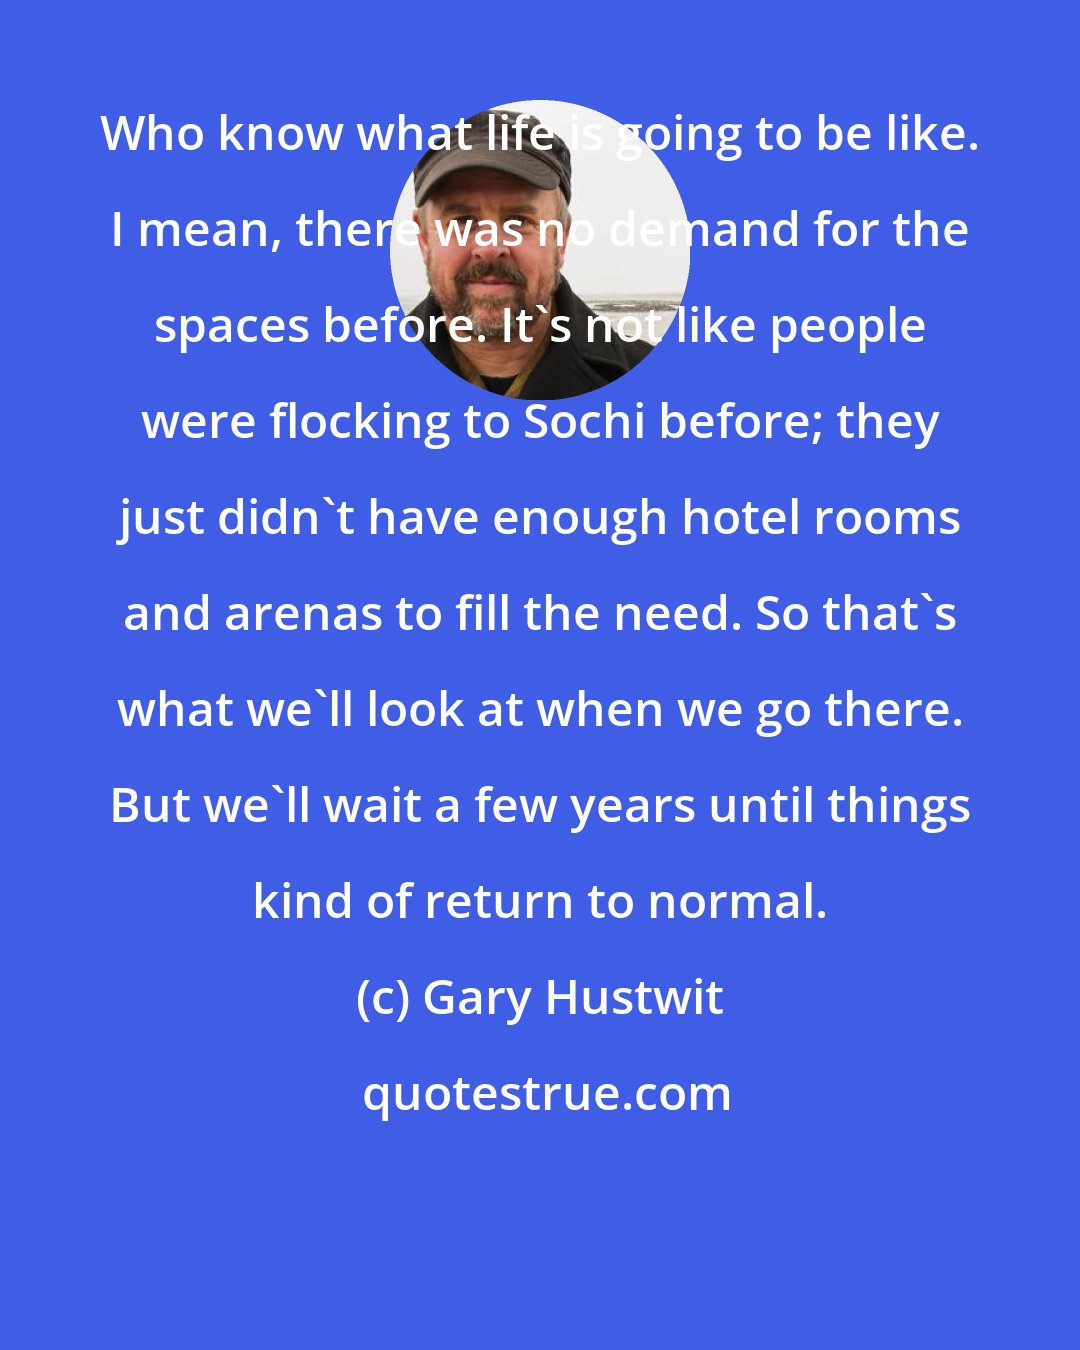 Gary Hustwit: Who know what life is going to be like. I mean, there was no demand for the spaces before. It's not like people were flocking to Sochi before; they just didn't have enough hotel rooms and arenas to fill the need. So that's what we'll look at when we go there. But we'll wait a few years until things kind of return to normal.